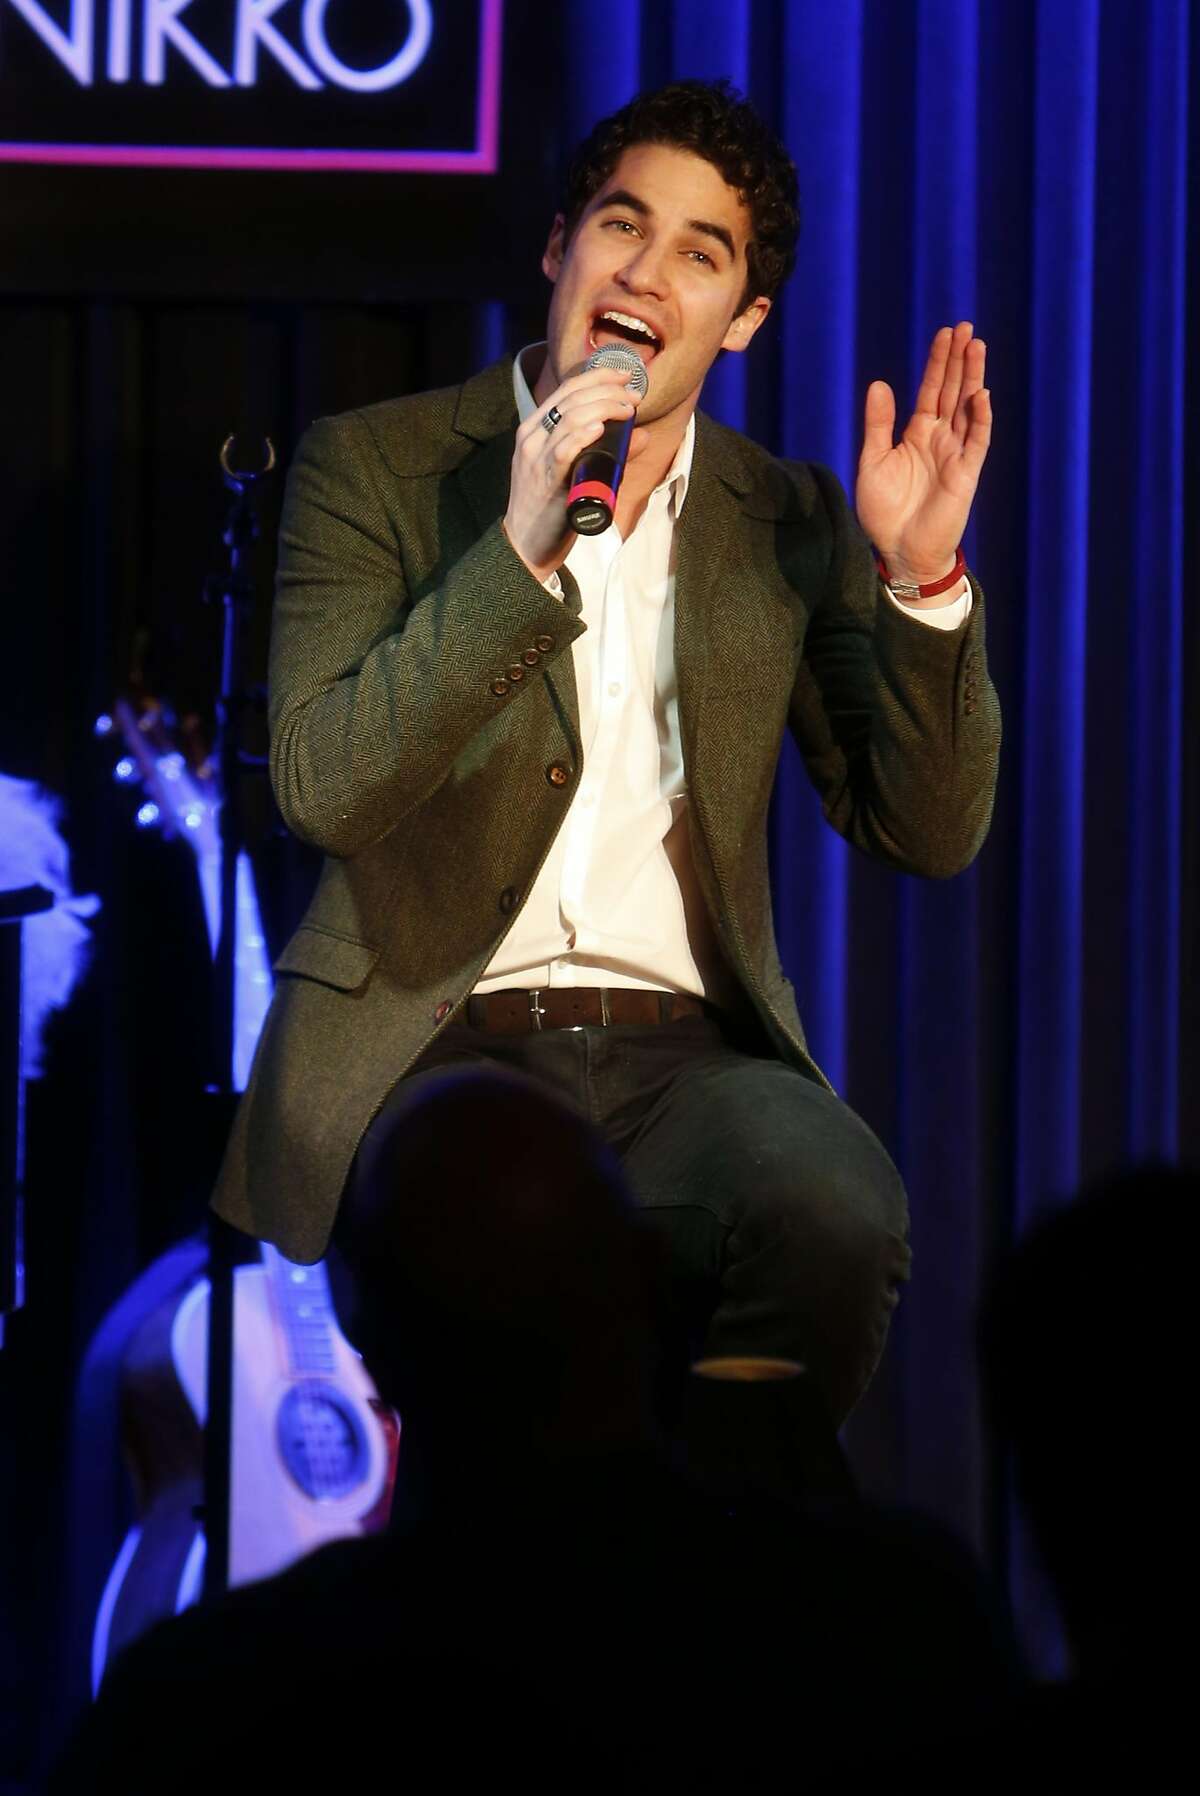 Former "Glee" star and San Francisco native Darren Criss plays Feinstein's at the Nikko in San Francisco, Calif., on Wednesday, November 30, 2016.